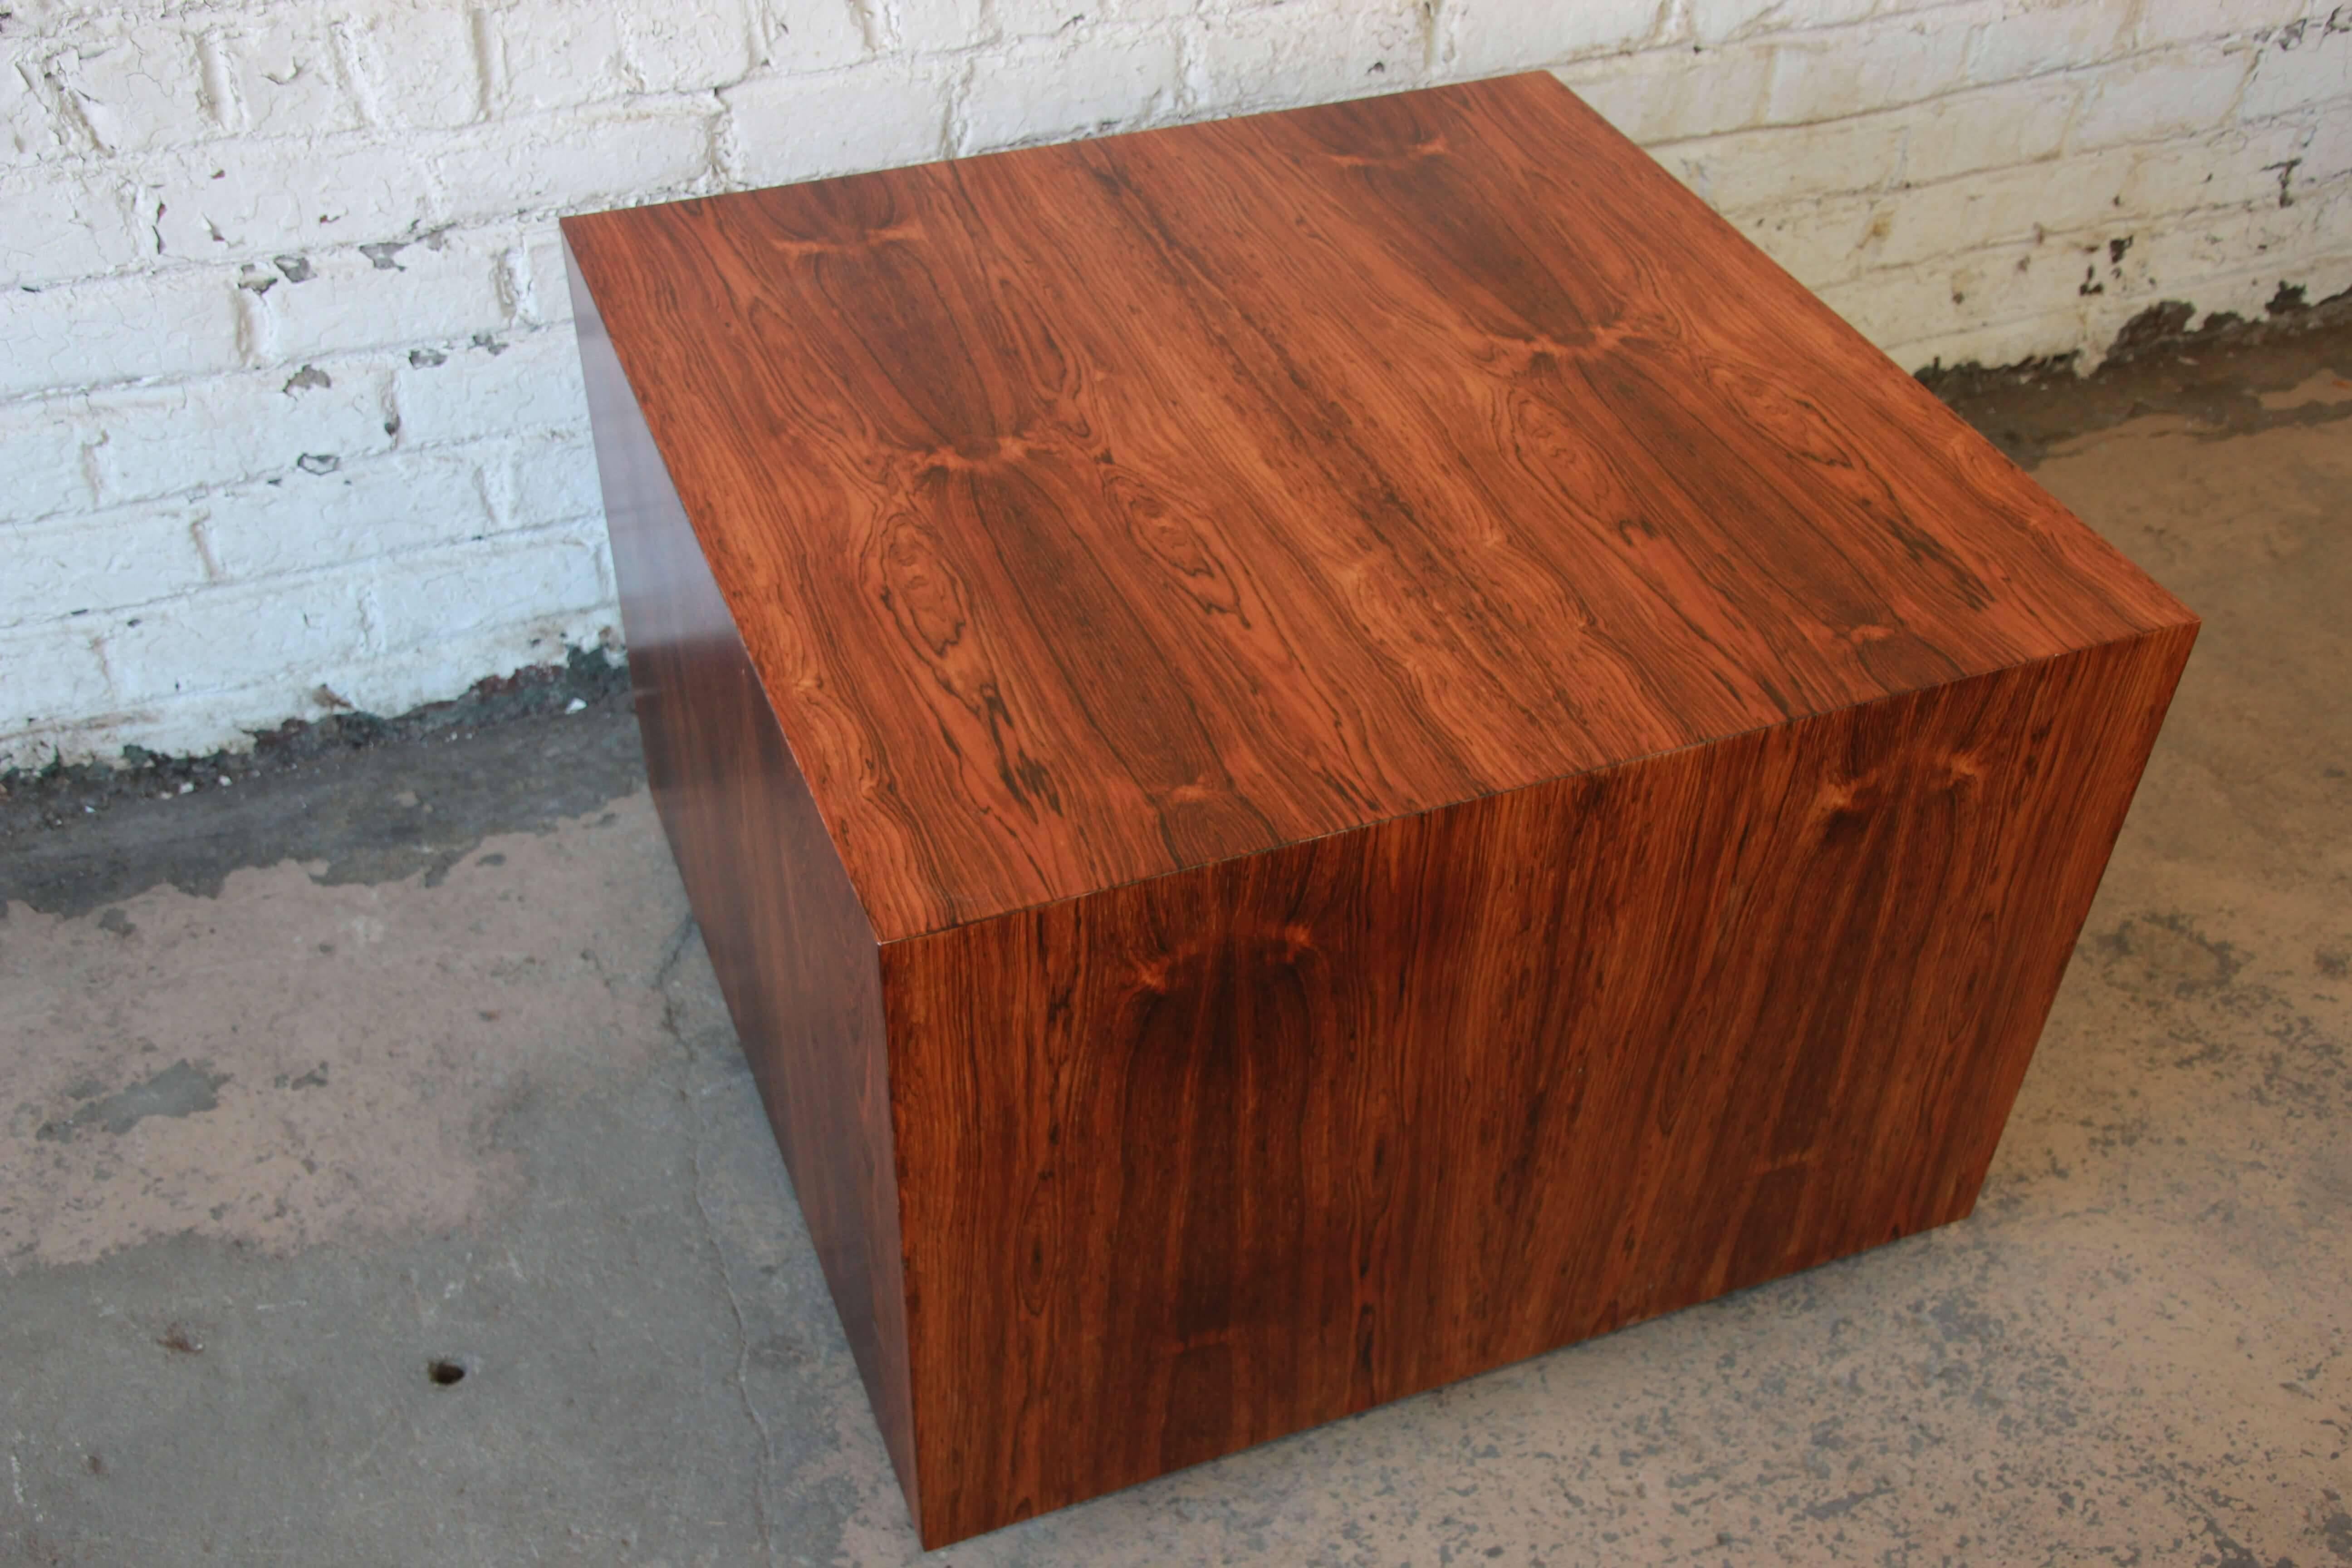 Offering a very nice and rare cube coffee table in rosewood by Milo Baughman for Thayer Coggin. This unique piece has beautiful rosewood wood grain making this a statement piece for any modern decor. It sits on a black plinth base and this piece has